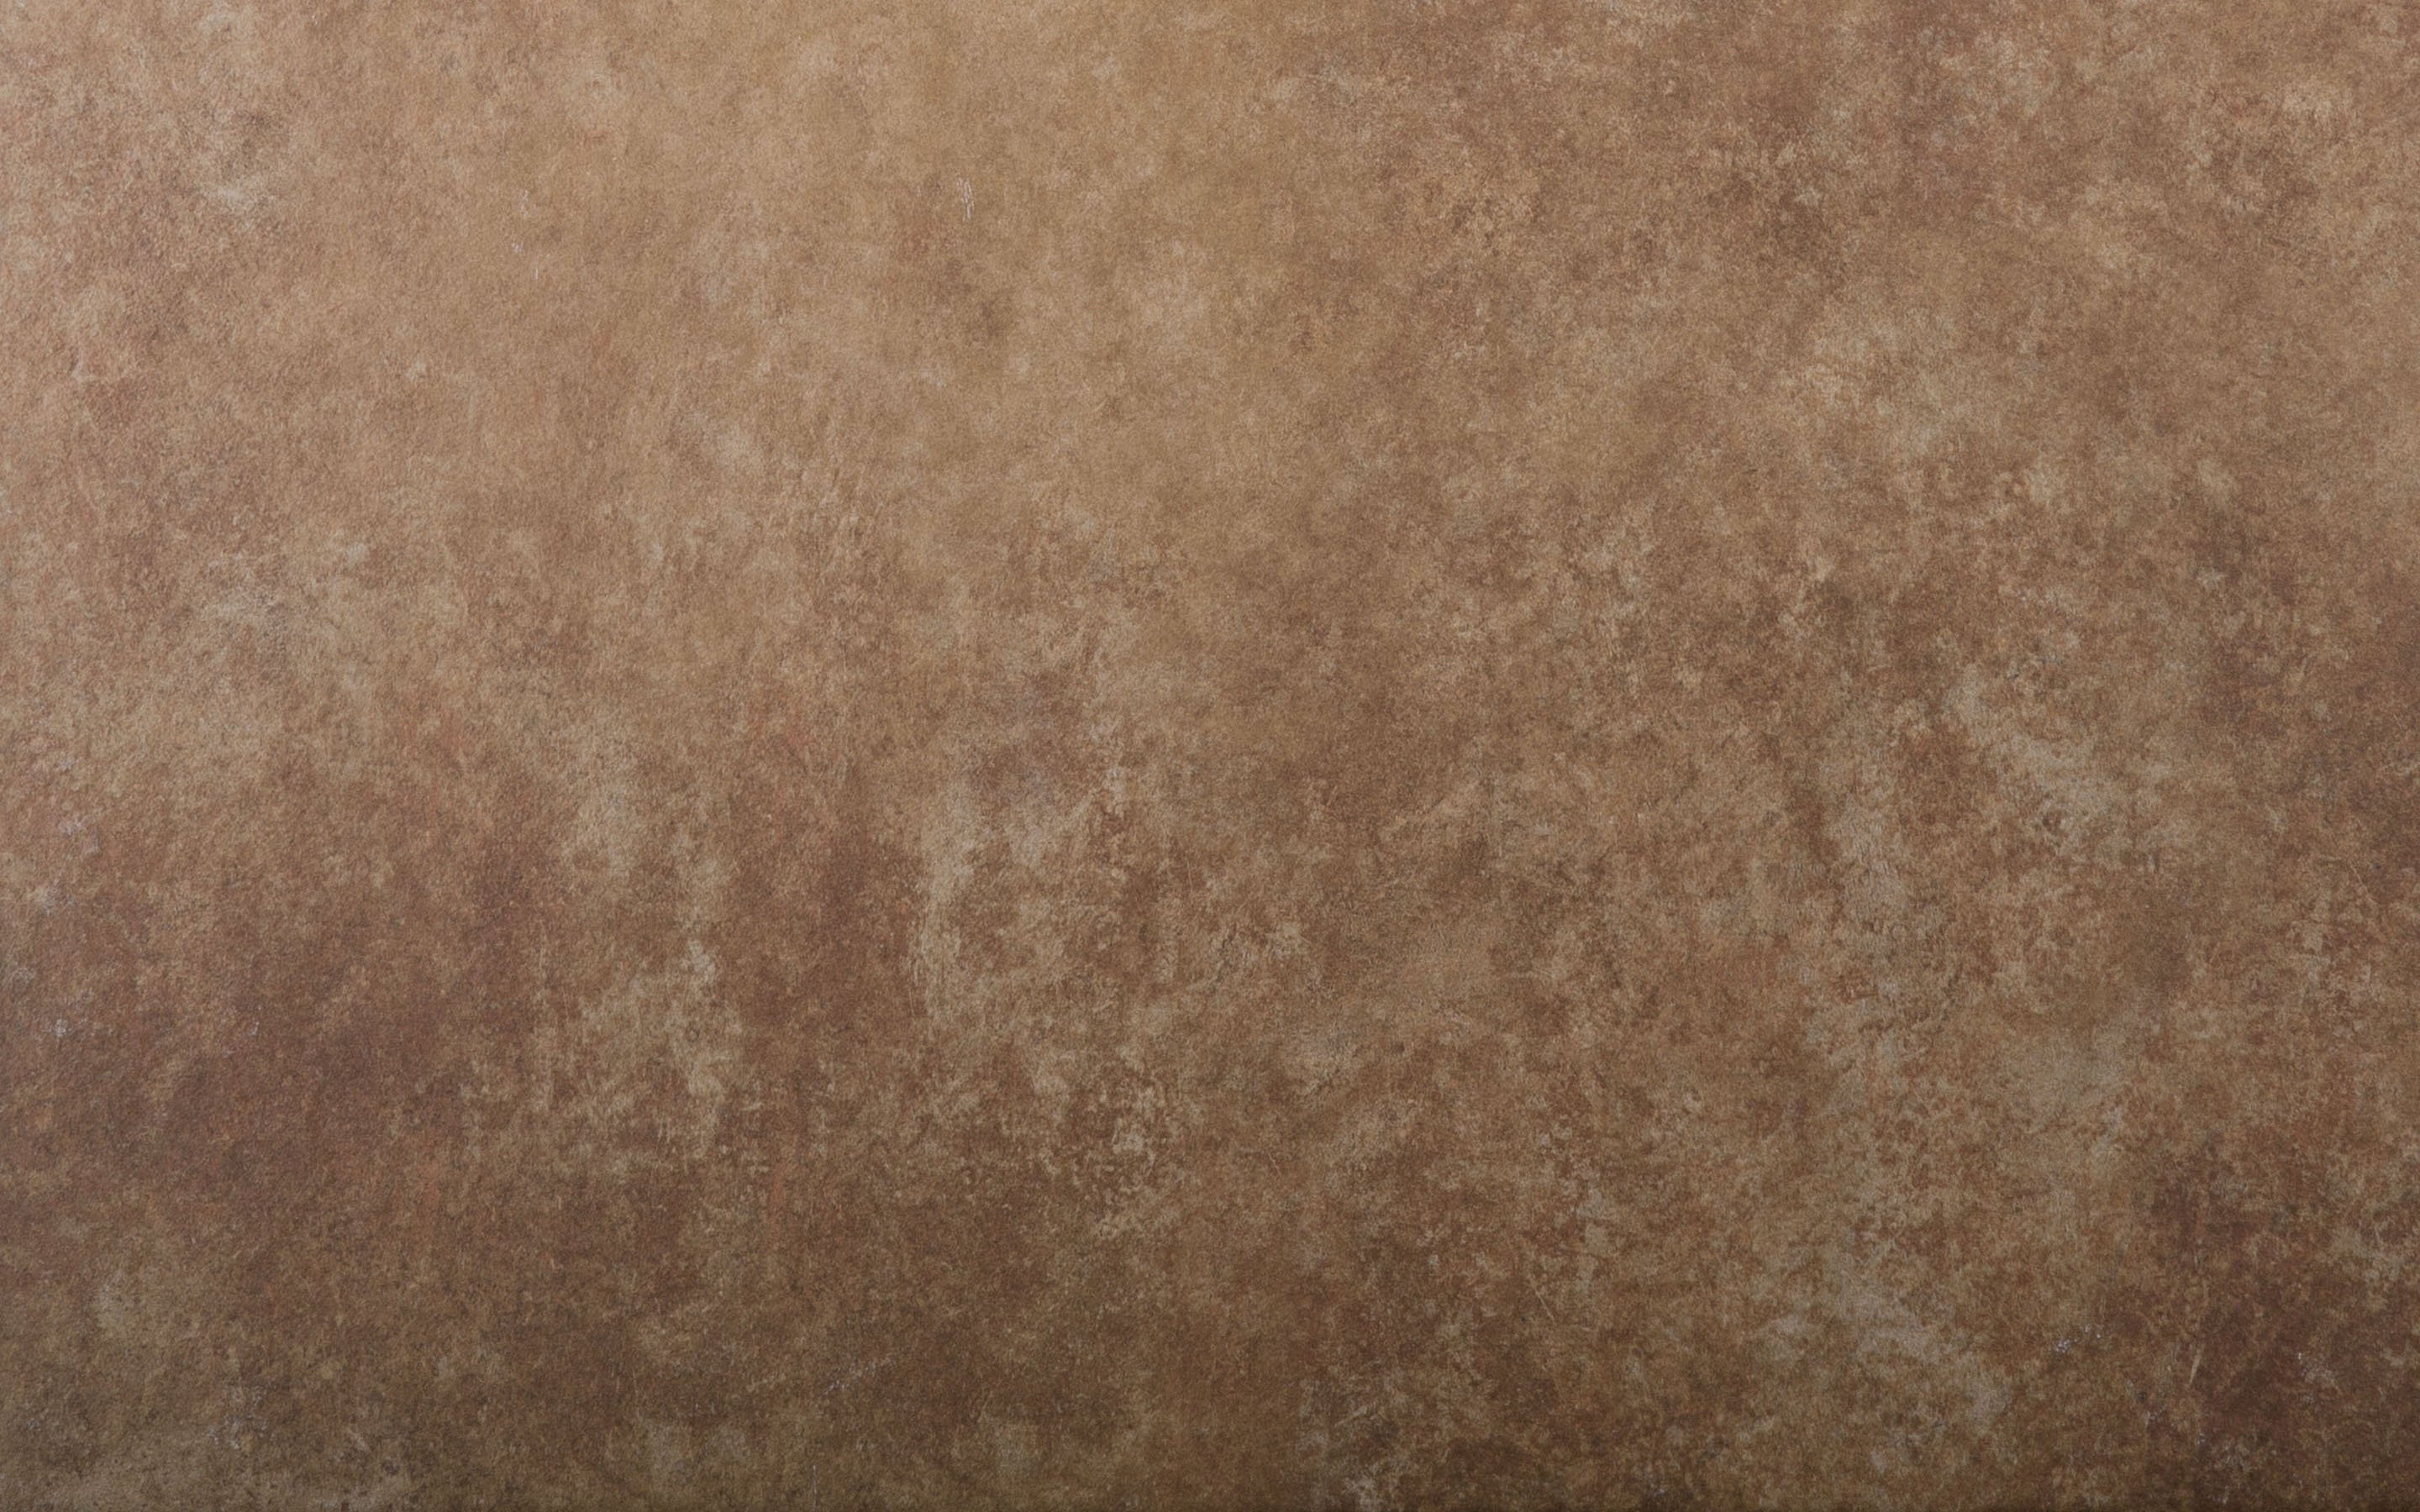 Download Wallpapers Brown Grunge Texture Brown Grunge Background Creative Backgrounds Stone Grunge Texture Concrete Texture For Desktop With Resolution 2880x1800 High Quality Hd Pictures Wallpapers